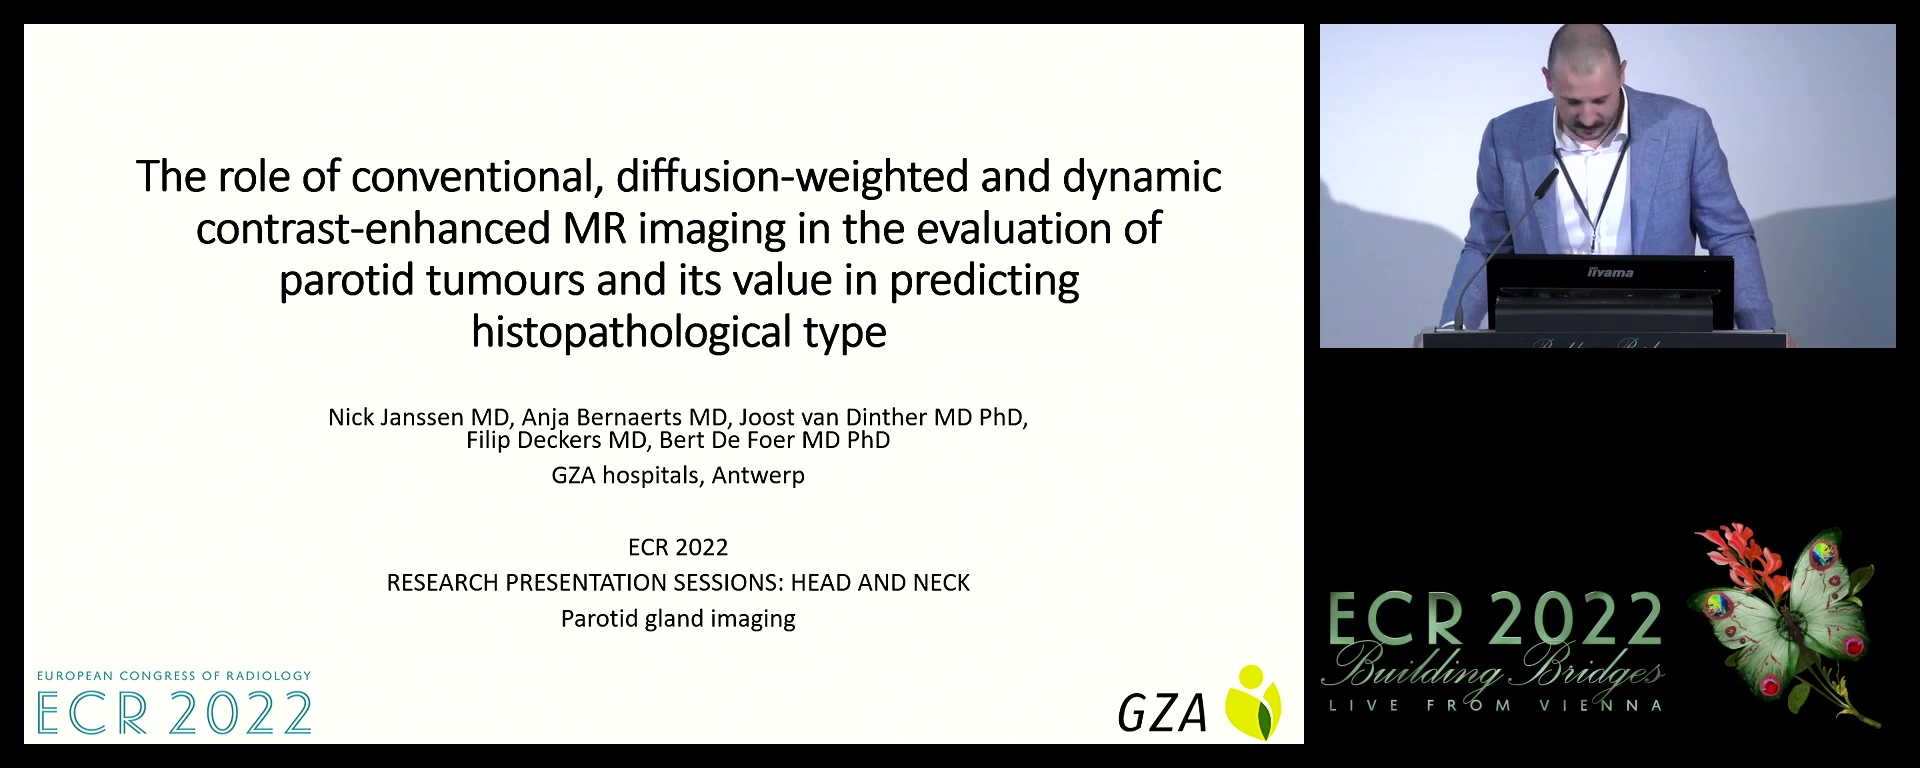 The role of conventional, diffusion-weighted and dynamic contrast-enhanced MR imaging in the evaluation of parotid tumours and its value in predicting histopathological type - Nick Janssen, Schoten / BE